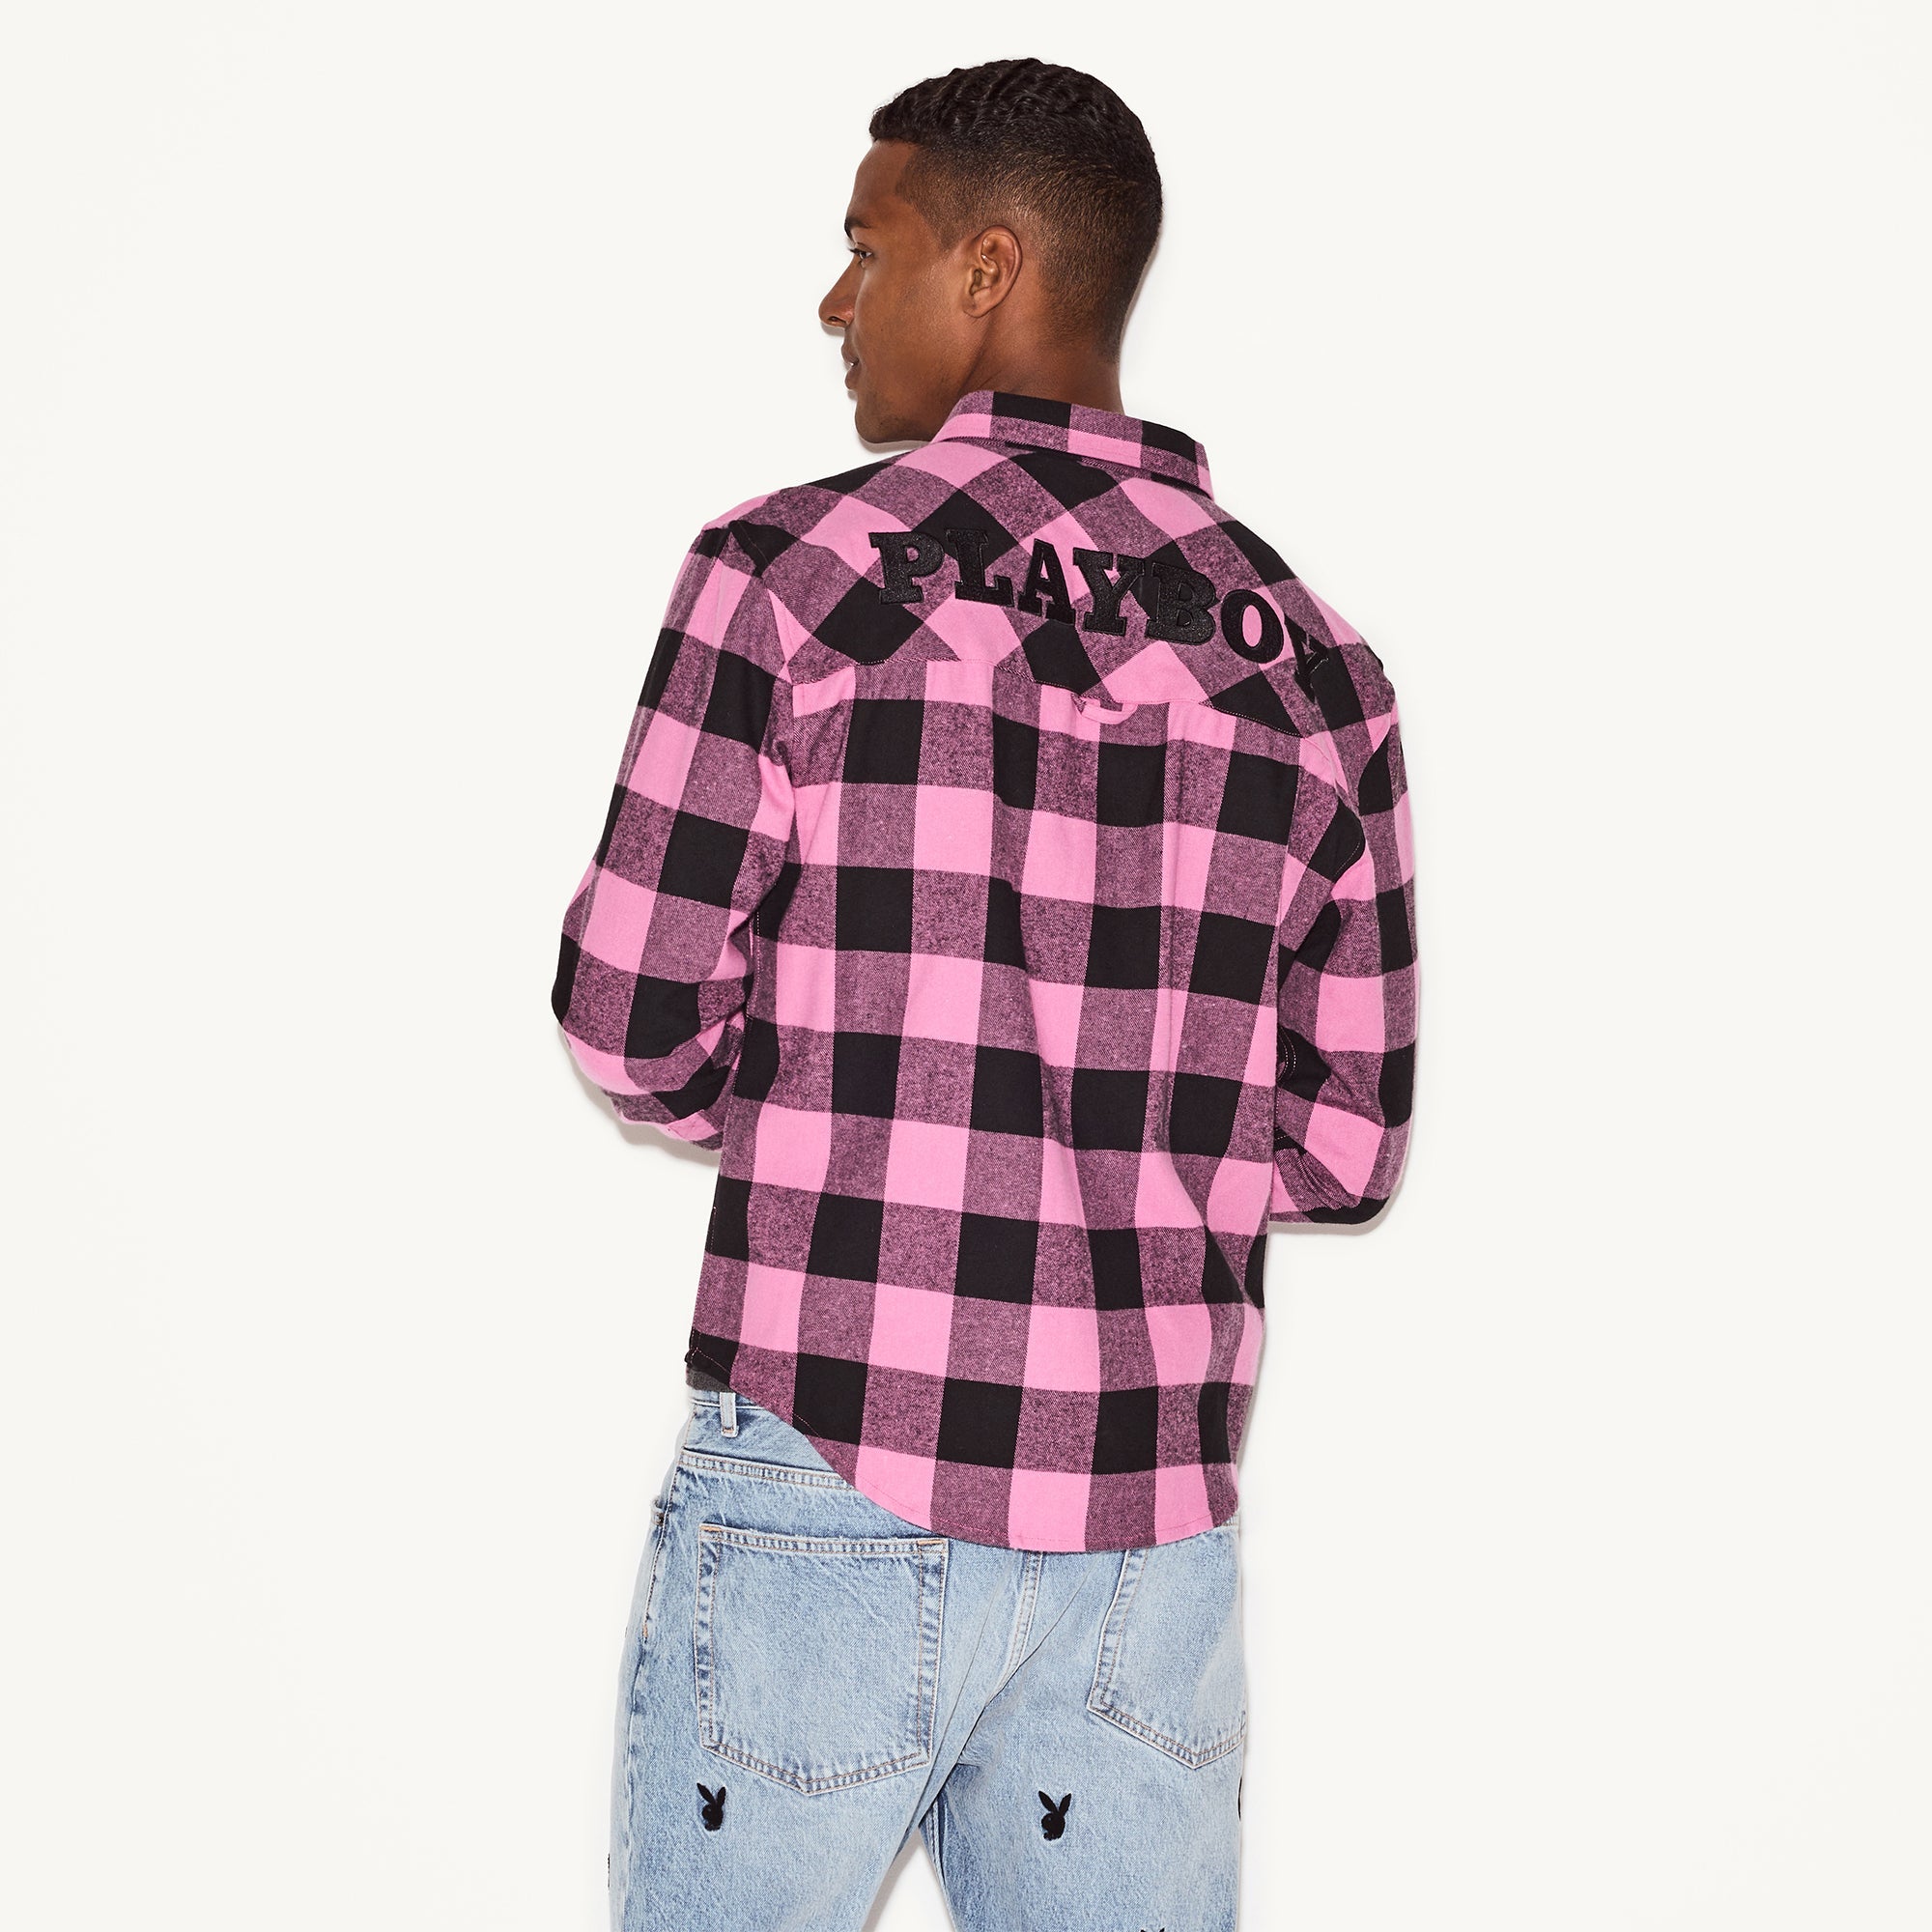 Flannel Long Sleeve: Timeless Pink Plaid Shirt by Playboy